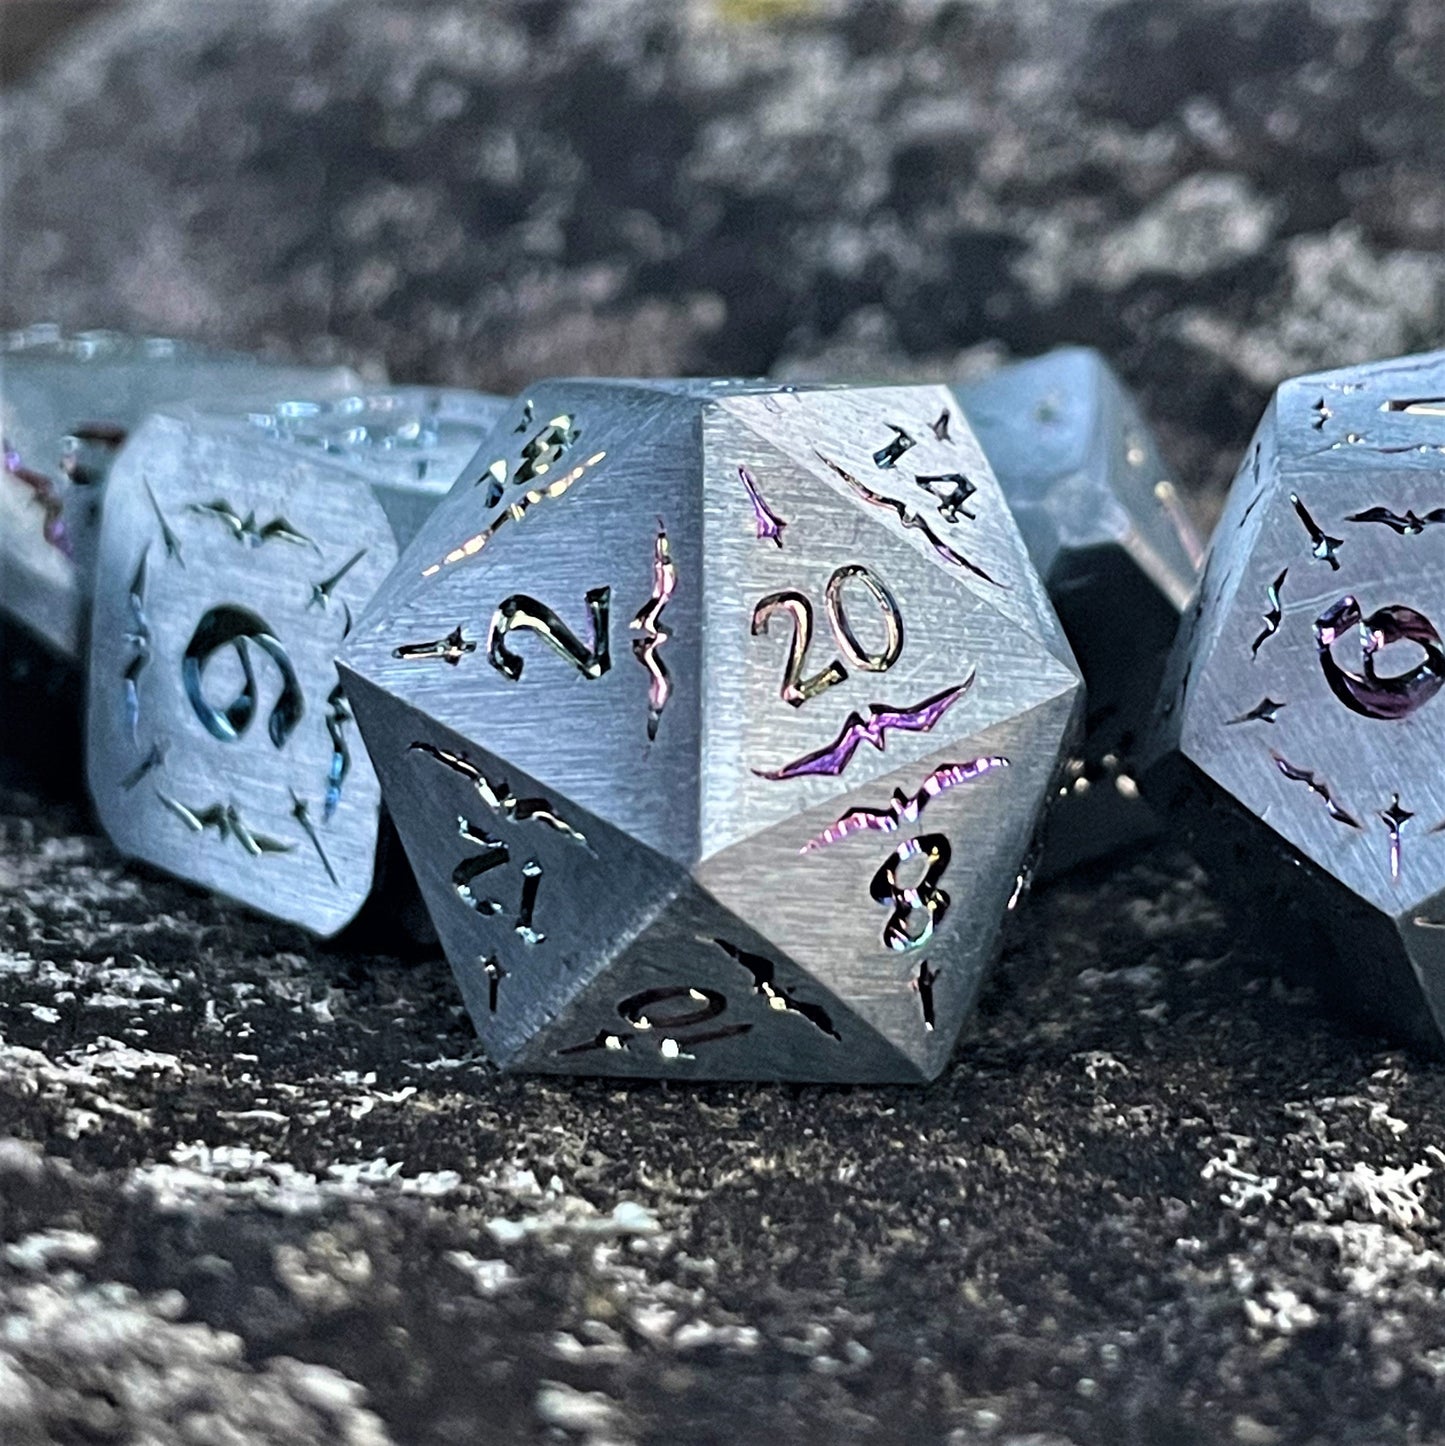 Sword of the Holy Knight Metal Dice Set